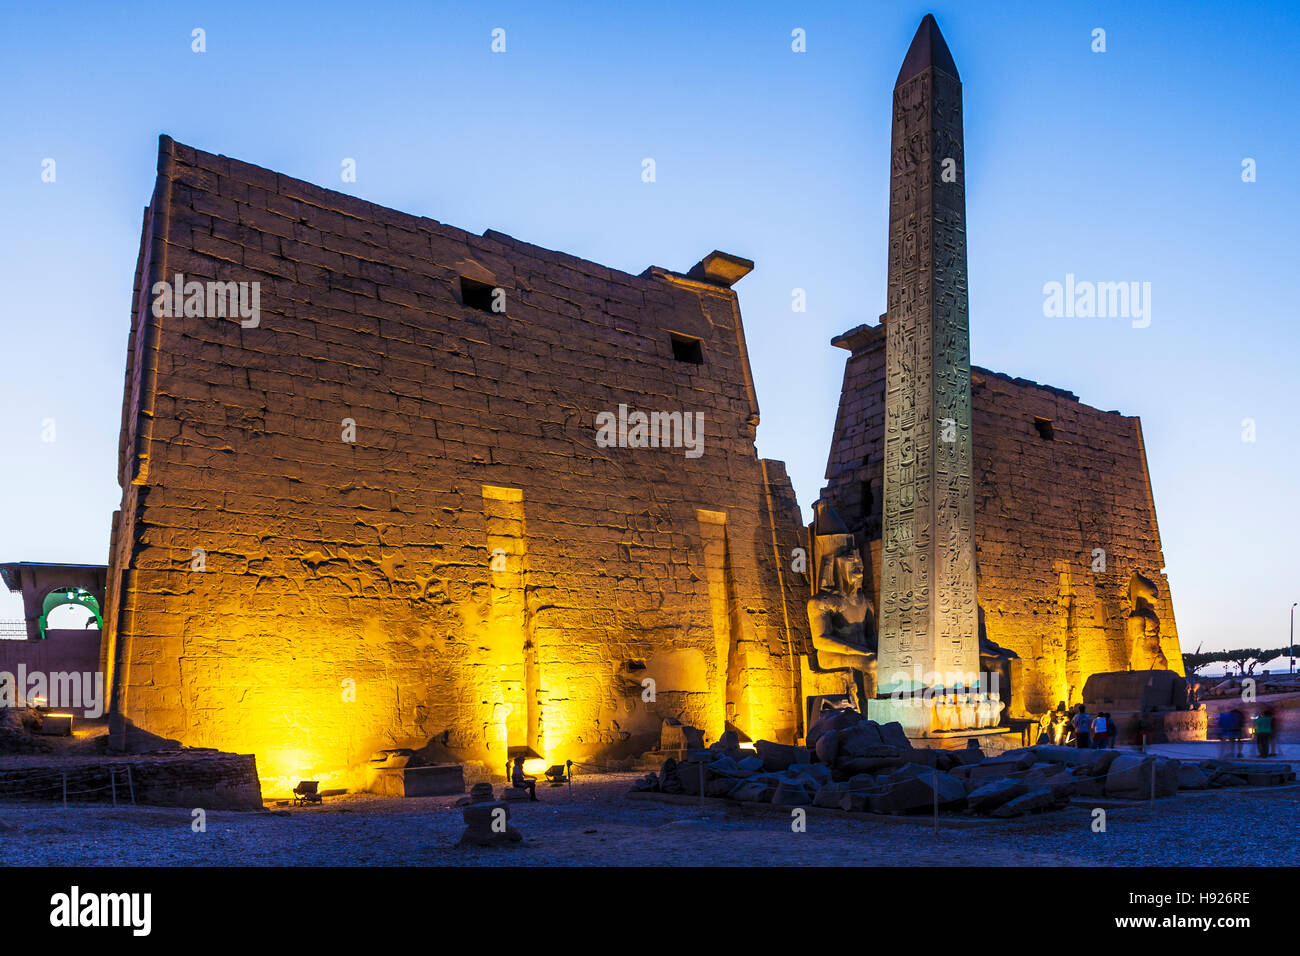 The obelisk and statue of Ramesses II at the entrance to Luxor Temple. Stock Photo